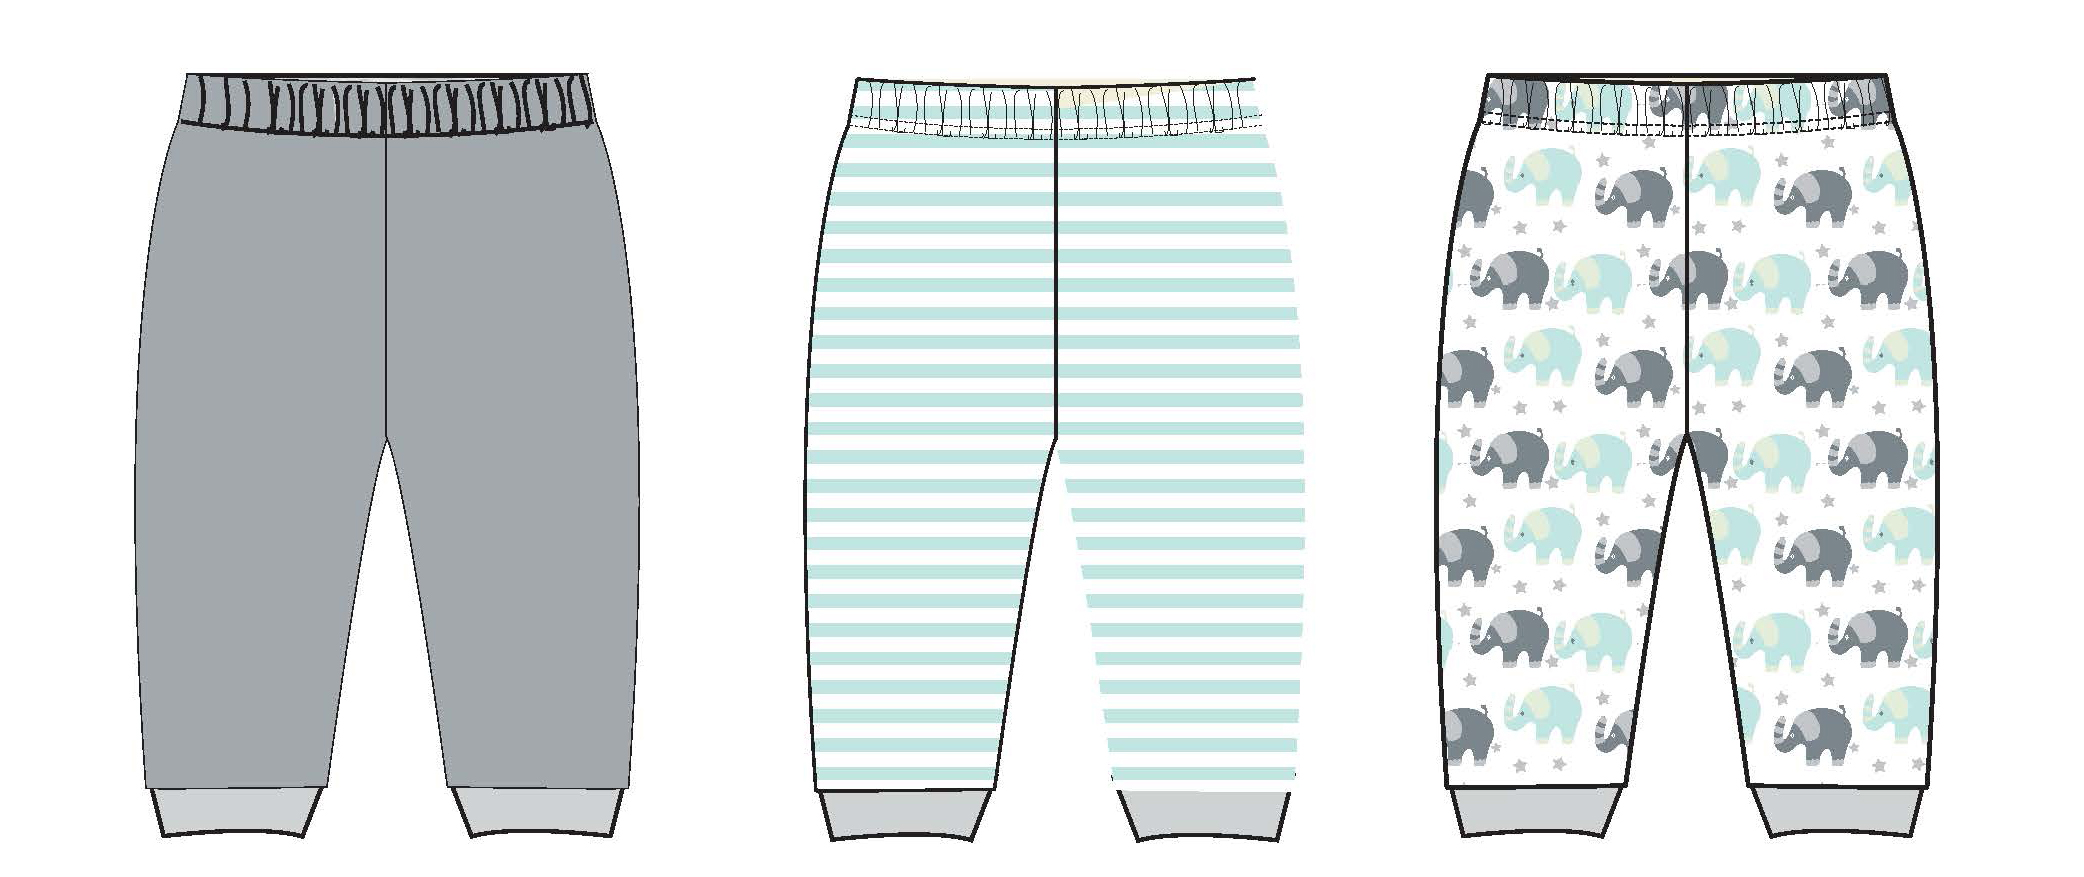 ''Baby Boy's Printed Pull-On PANTS w/ Striped, Solid, & Elephant Print - Sizes 12M-24M''